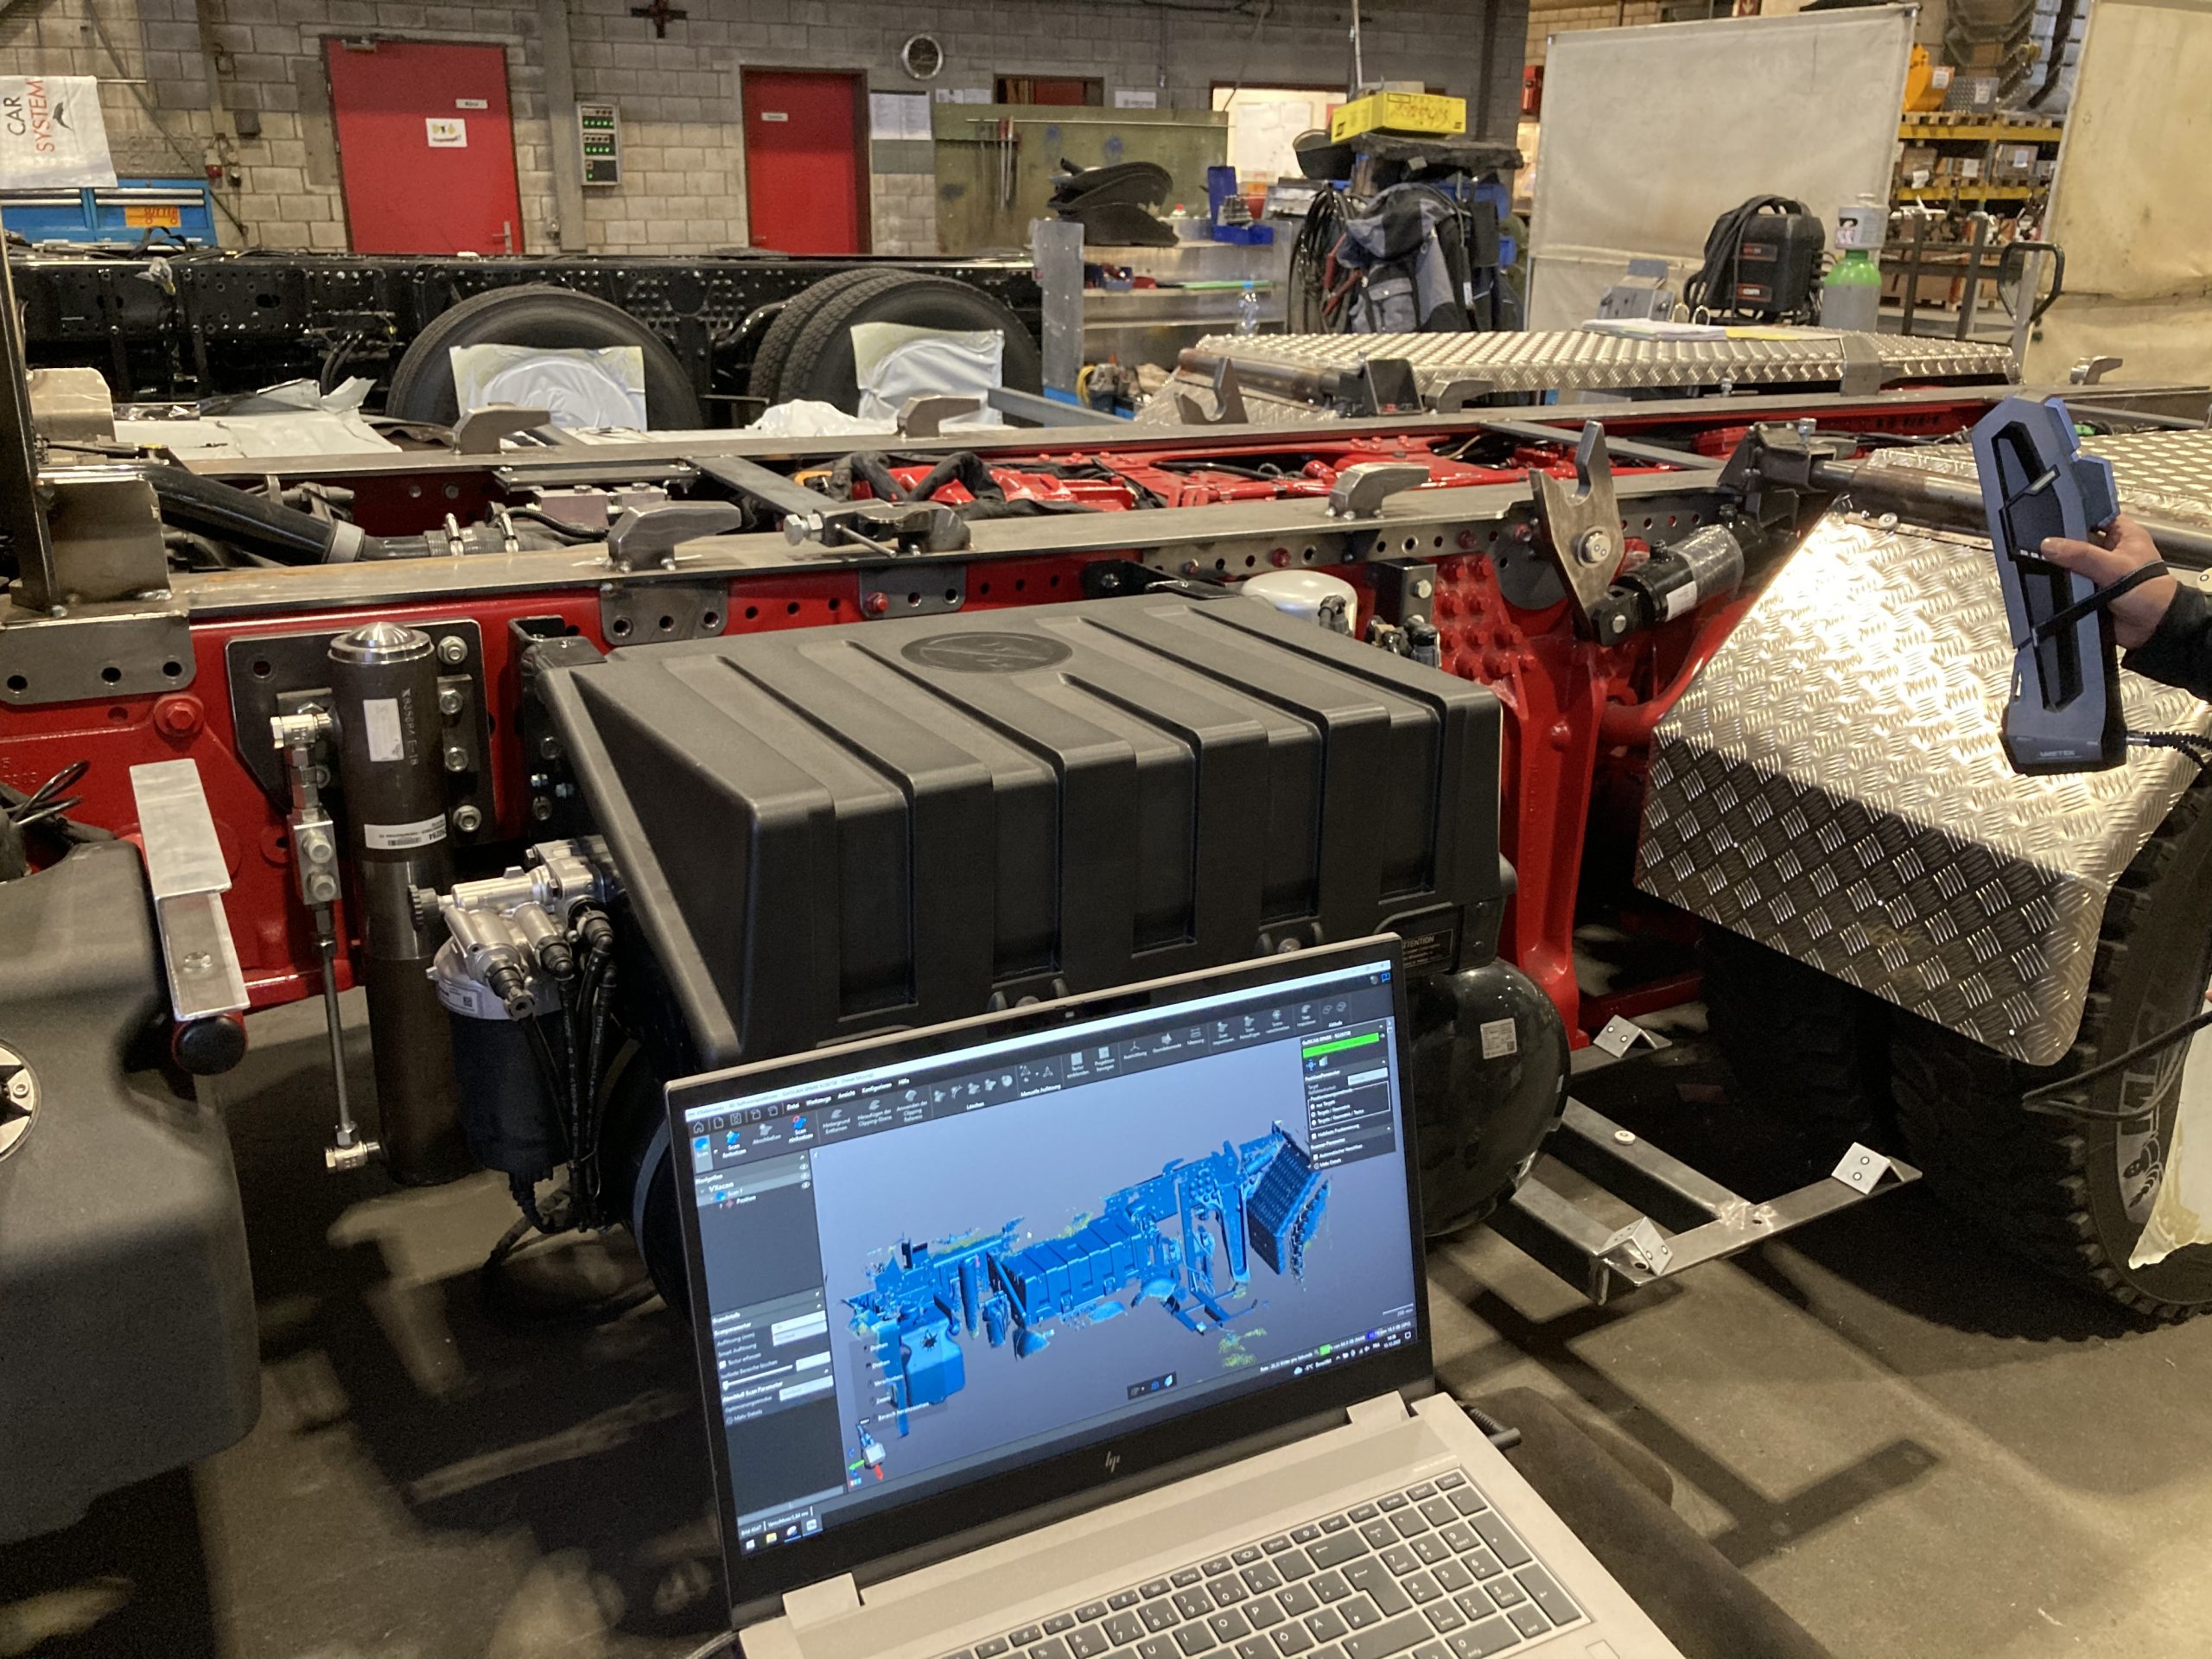 Go!SCAN SPARK scans truck chassis bodies. In the foreground is a laptop showing the scan.